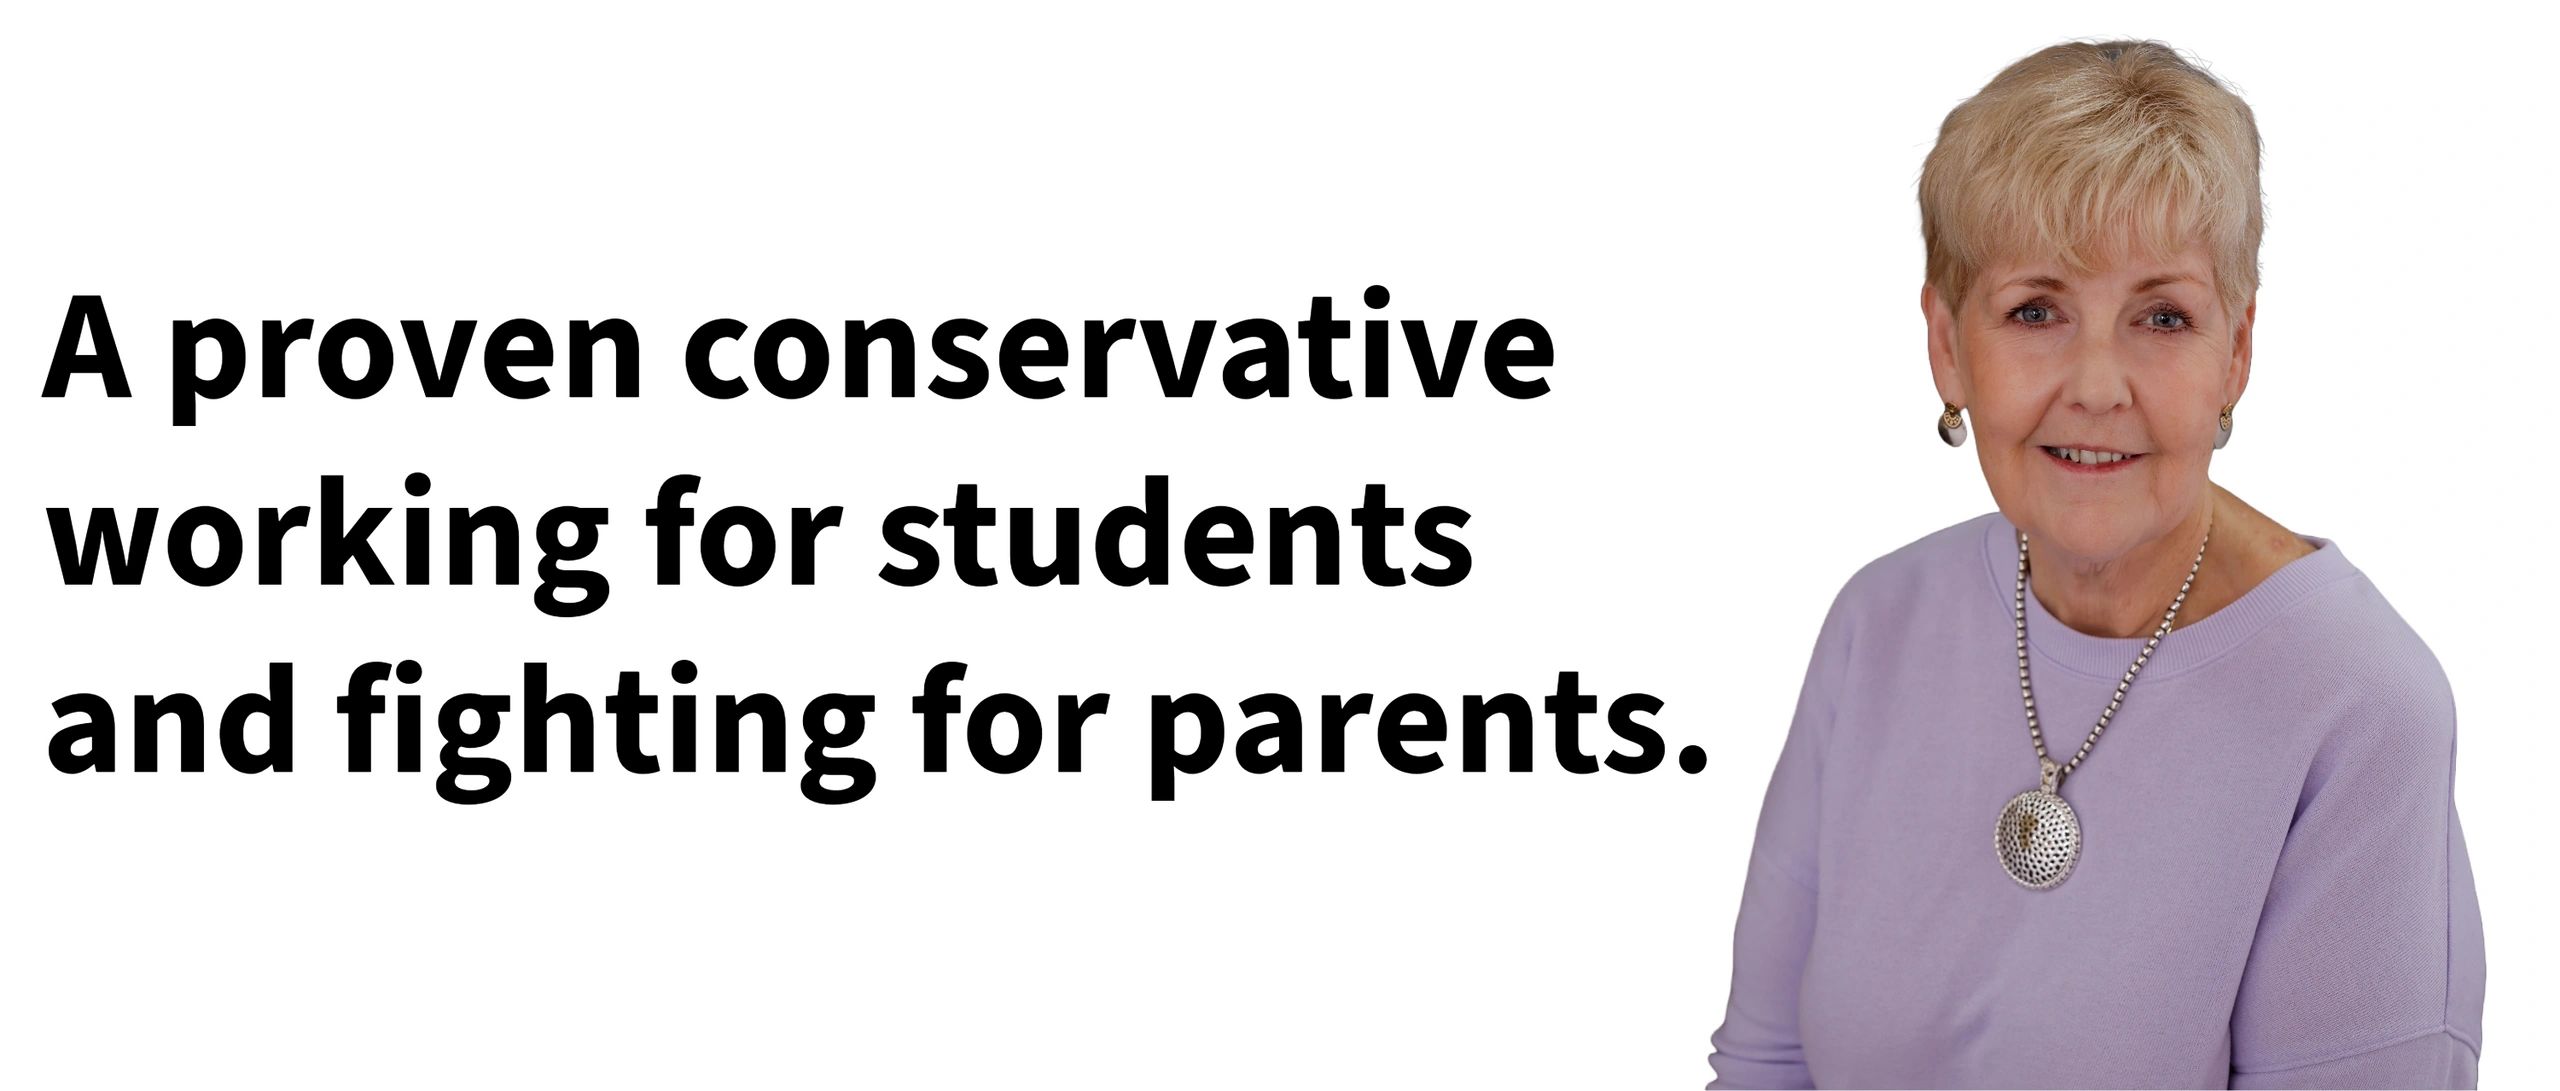 Pat Hardy: A proven conservative working for students and fighting for parents.